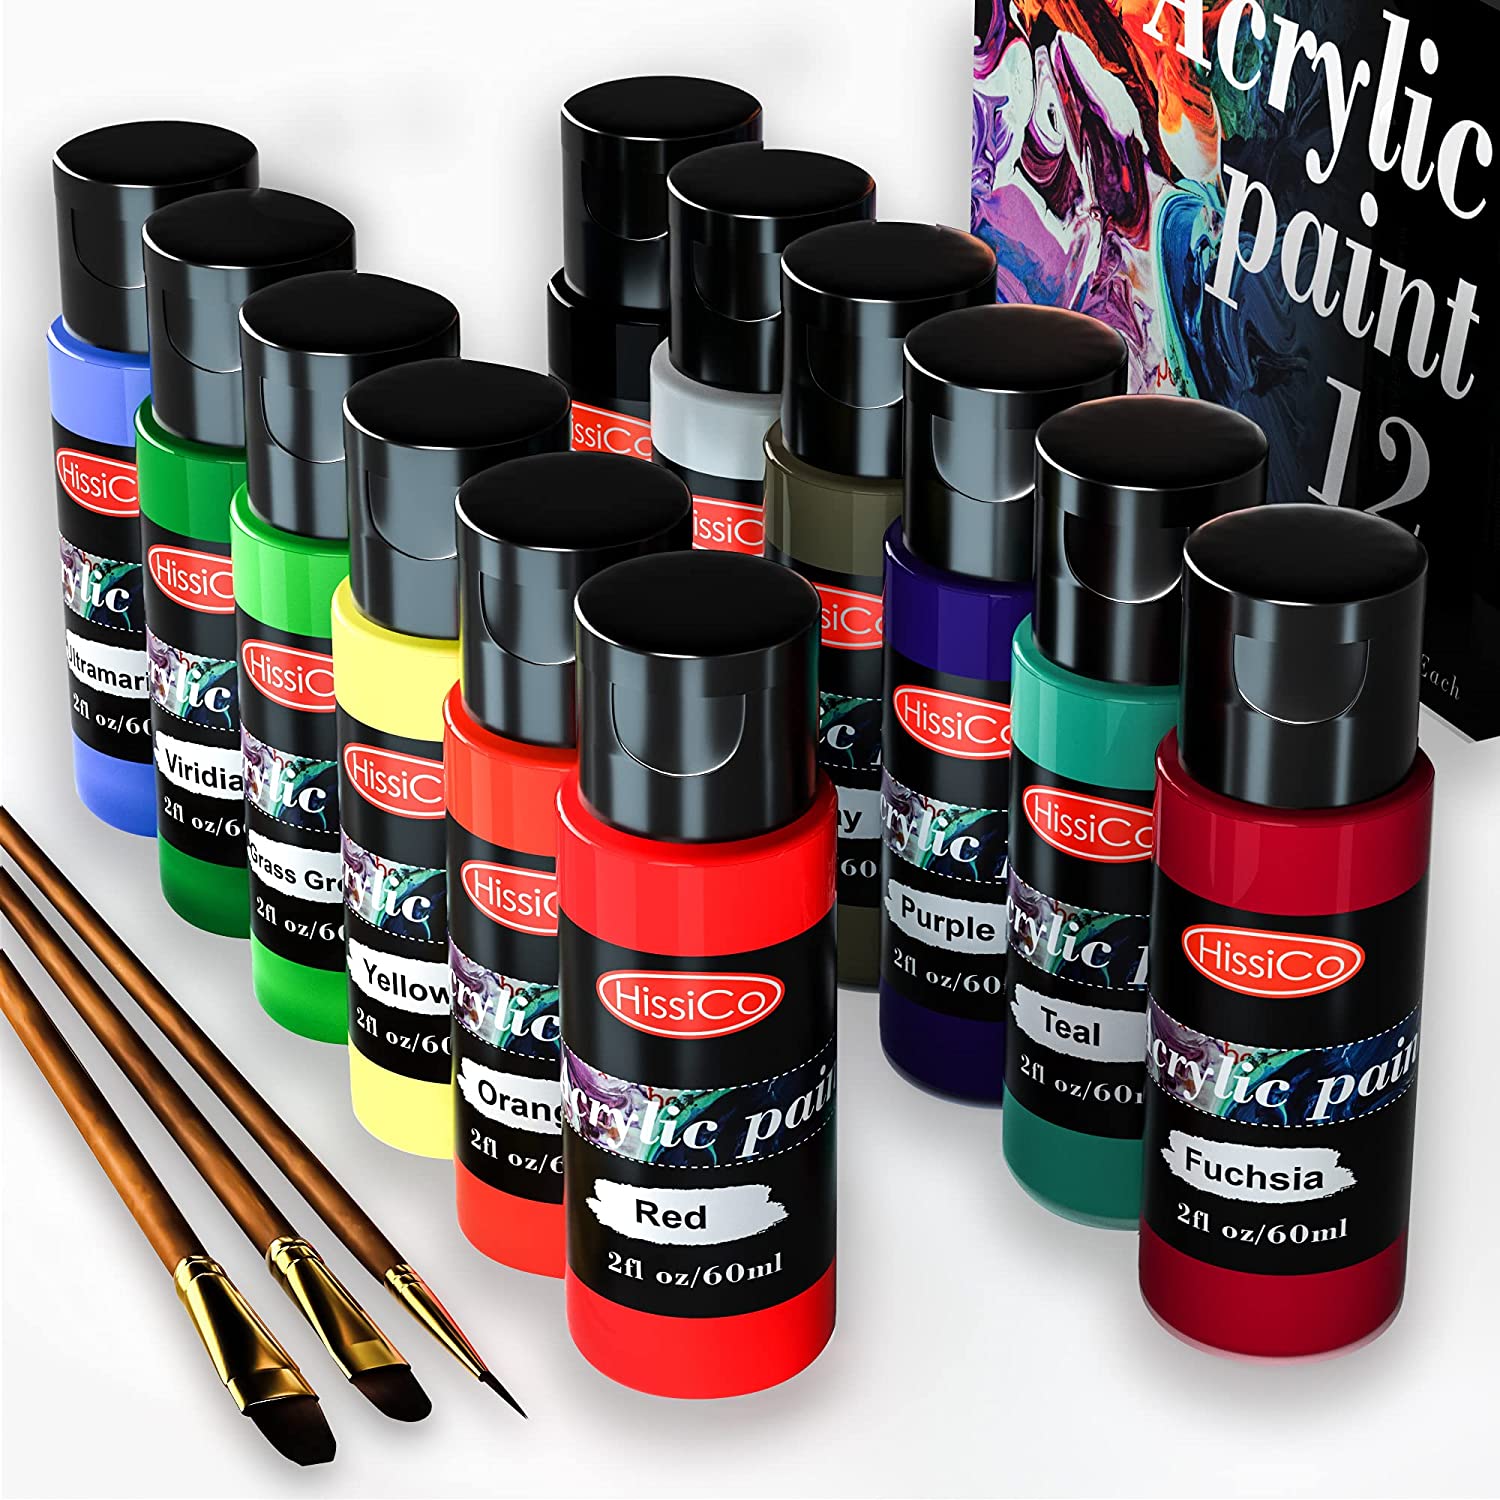 Acrylic Paint Set of 24 Colors 2Fl oz 60ml Bottles with 3 Brushes,Non Toxic 24 Colors Acrylic Paint No Fading Rich Pigment for Kids Adults Artists Can